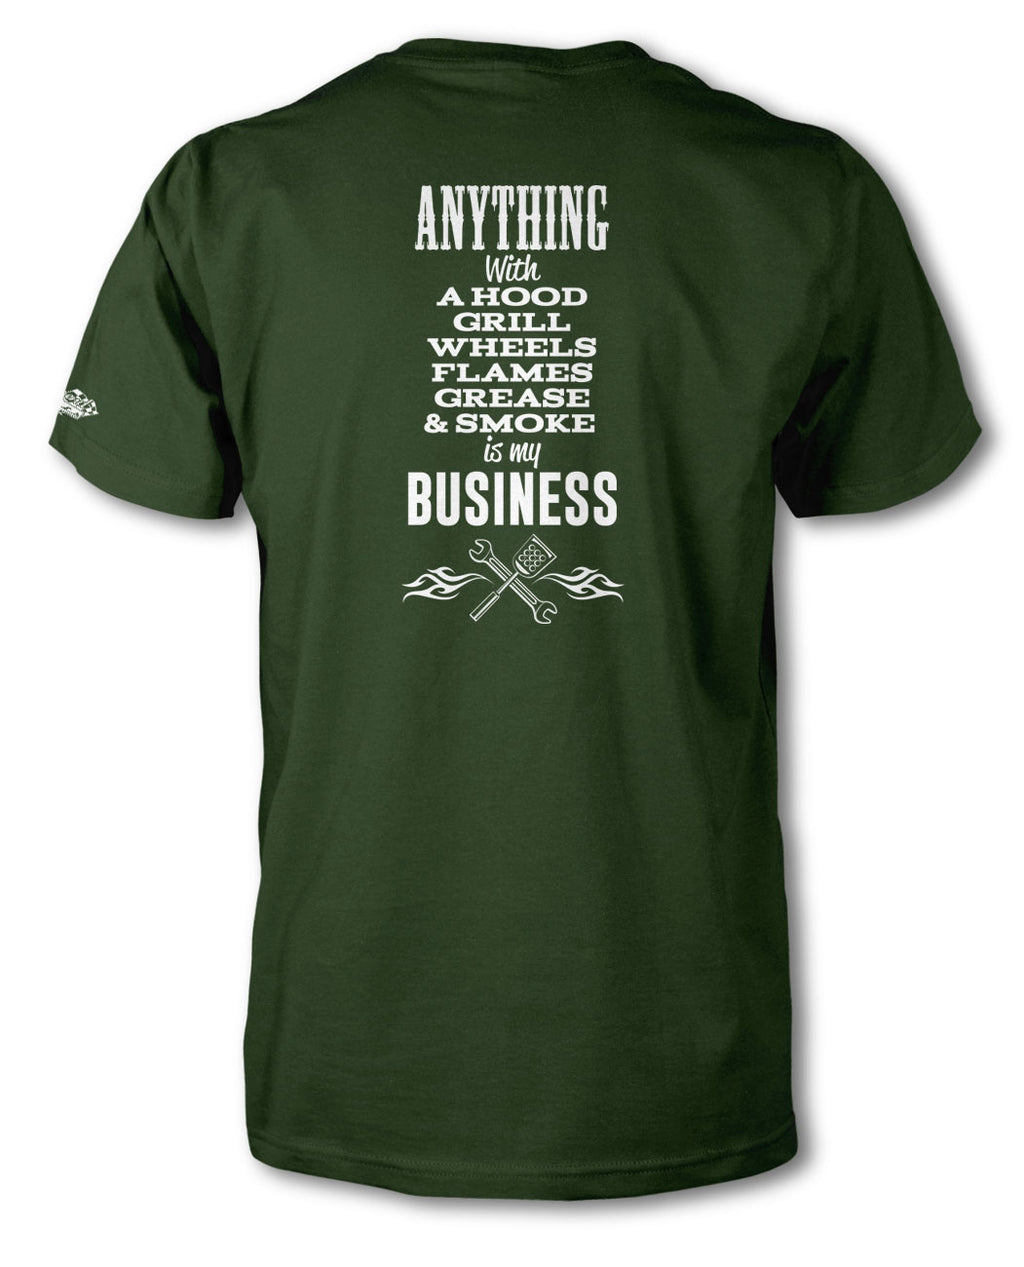 Anything with A Hood, Wheels, Grill, Flames, Grease & Smoke is my Business - T-Shirt - Men